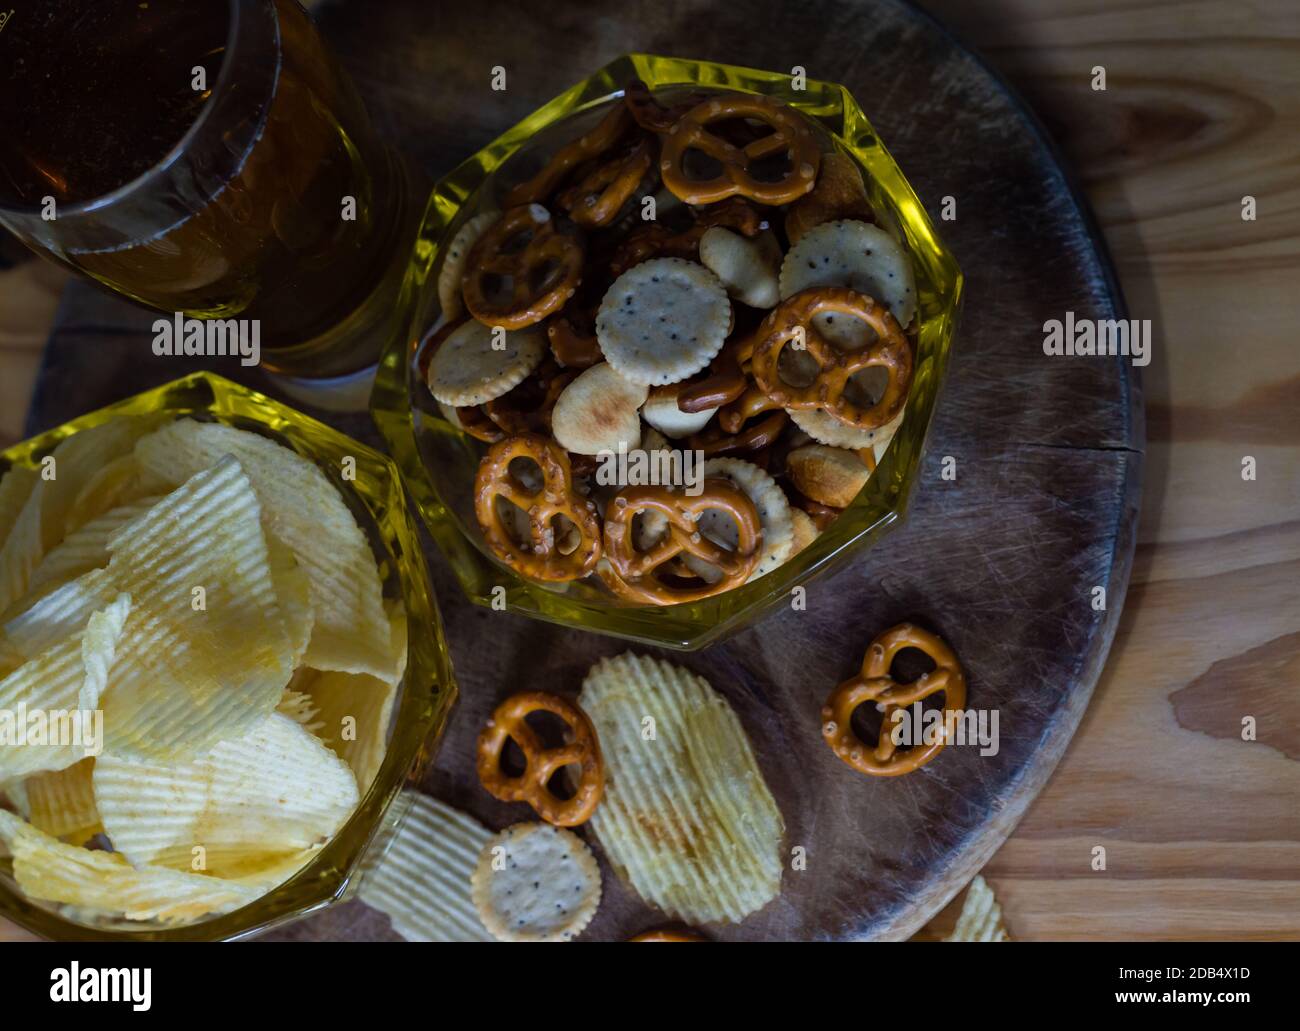 Cold beer and wavy potato chips in a bowl and salty snacks pretzel on a wood table Stock Photo